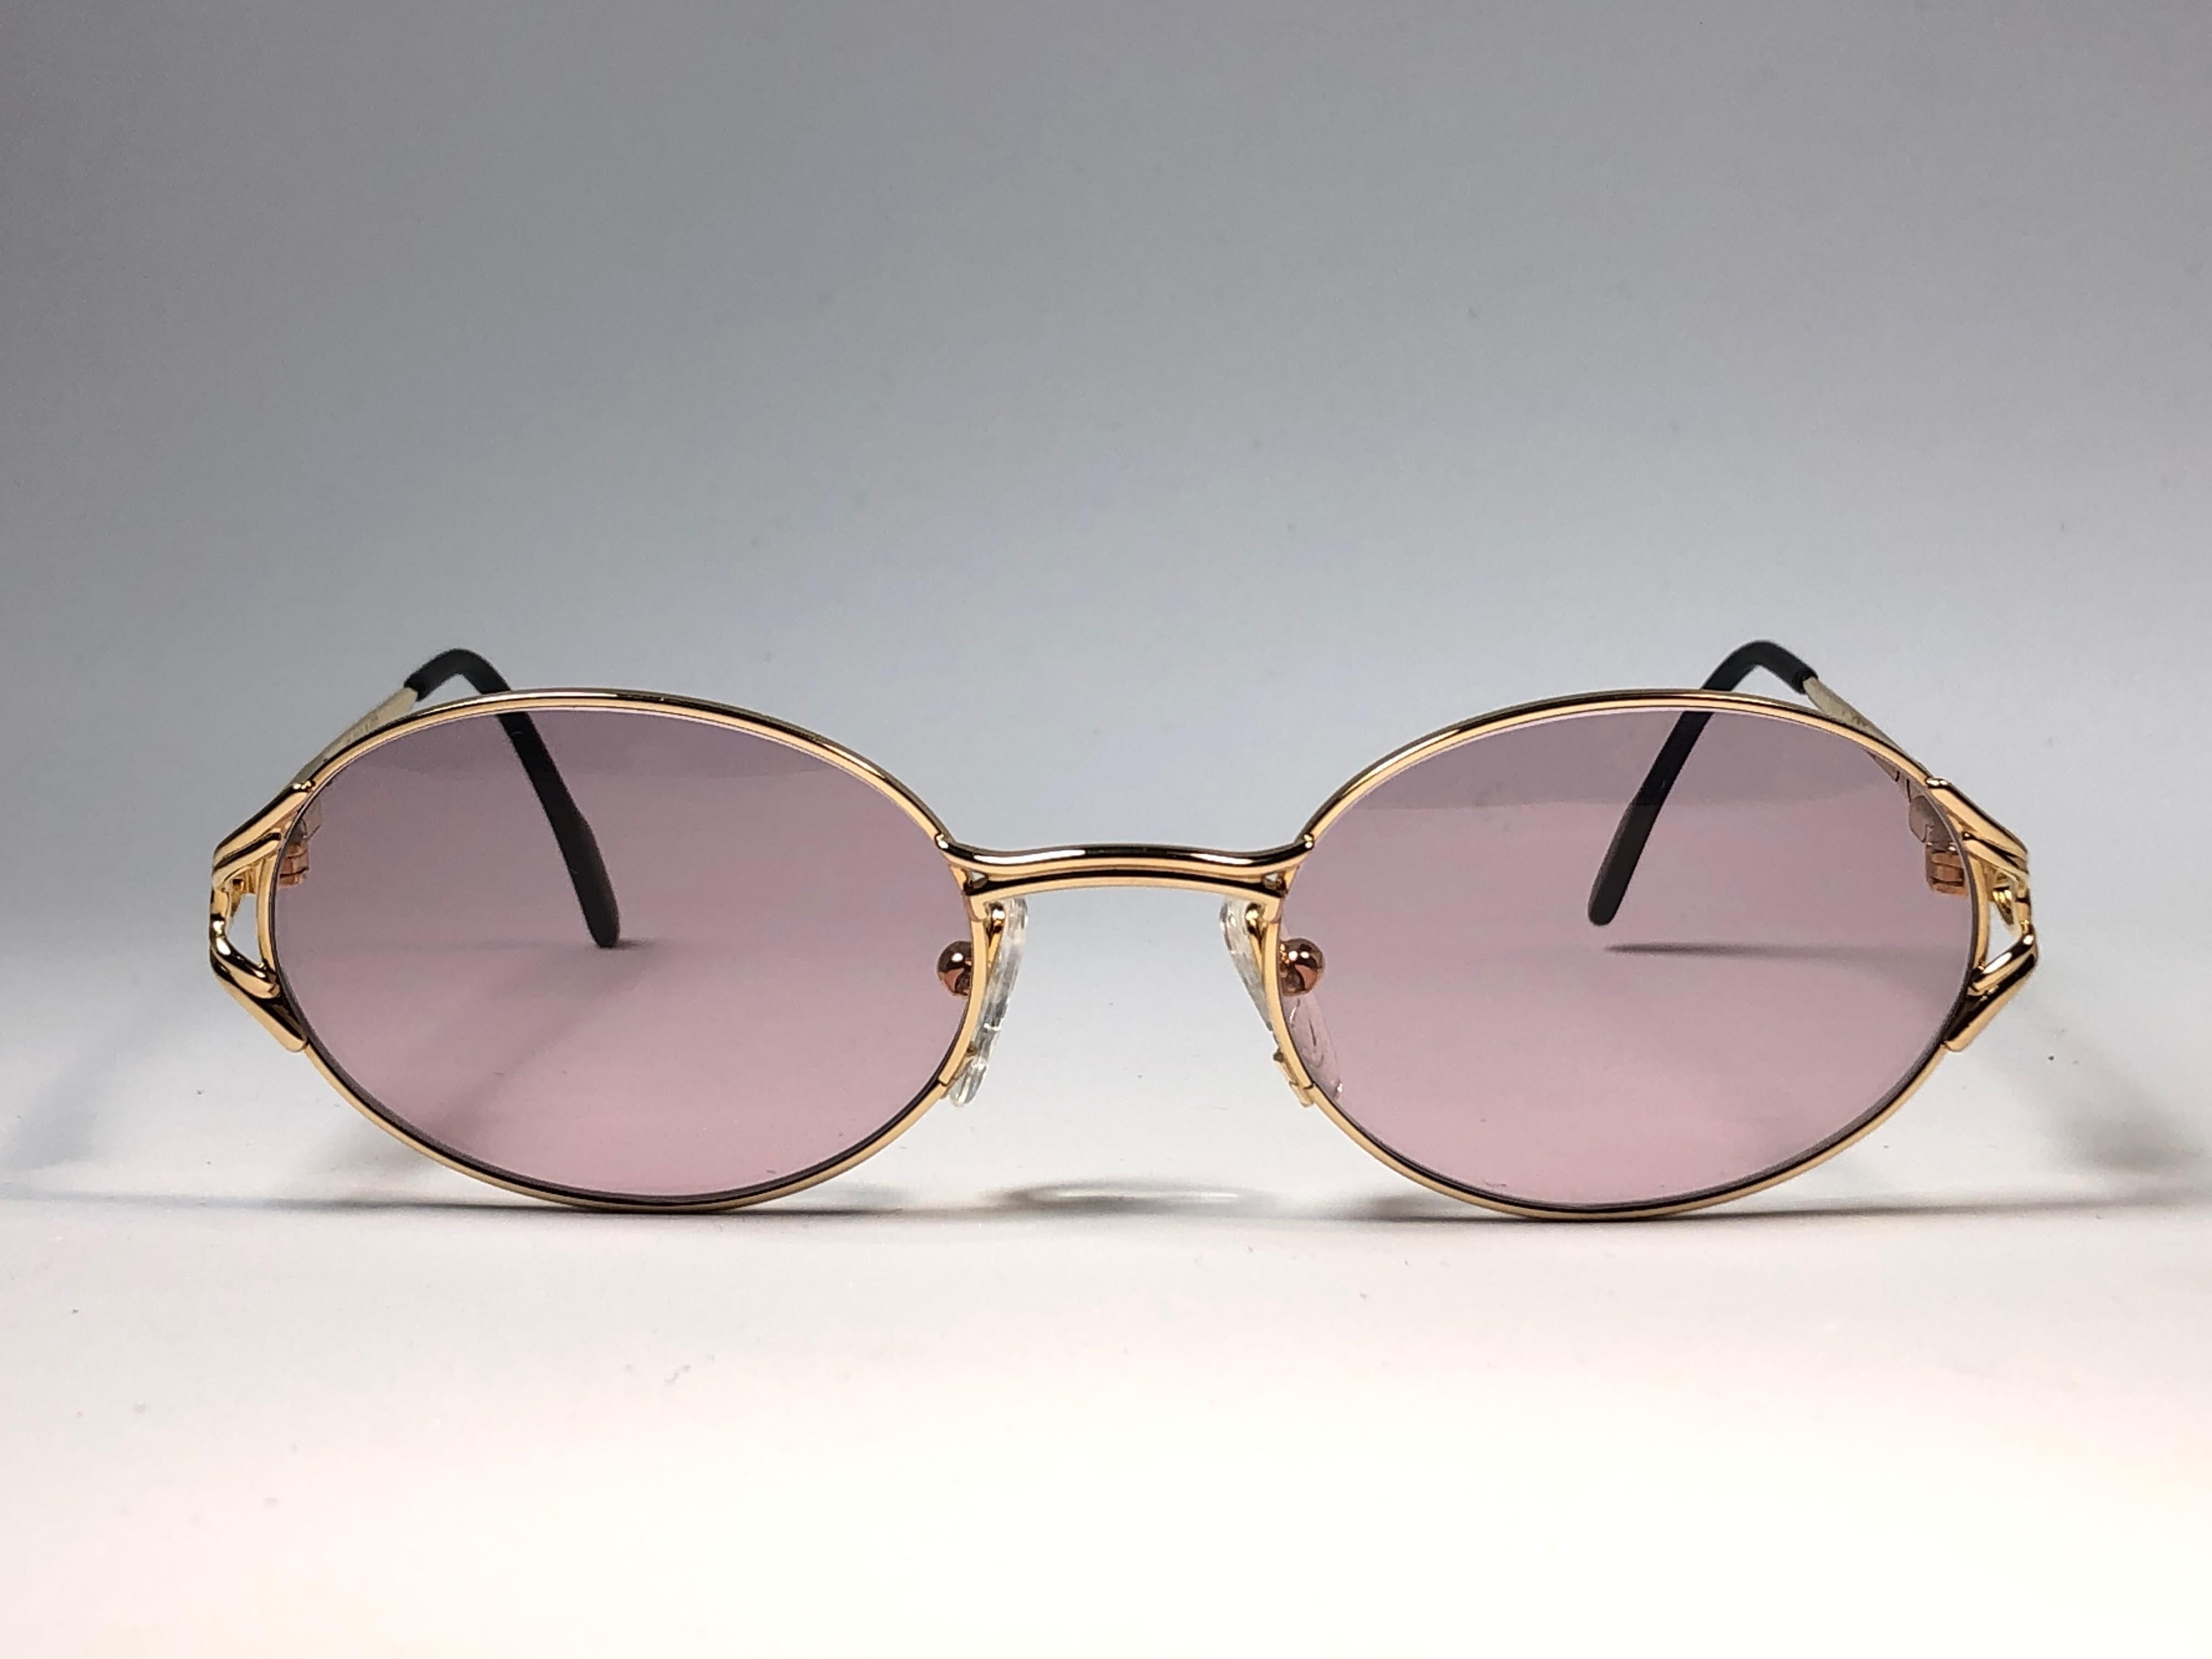 New Tiffany gold plated frame. Spotless rose lenses.

Made in Italy.
 
Produced and design in 1990's.

This item may show minor sign of wear due to storage.